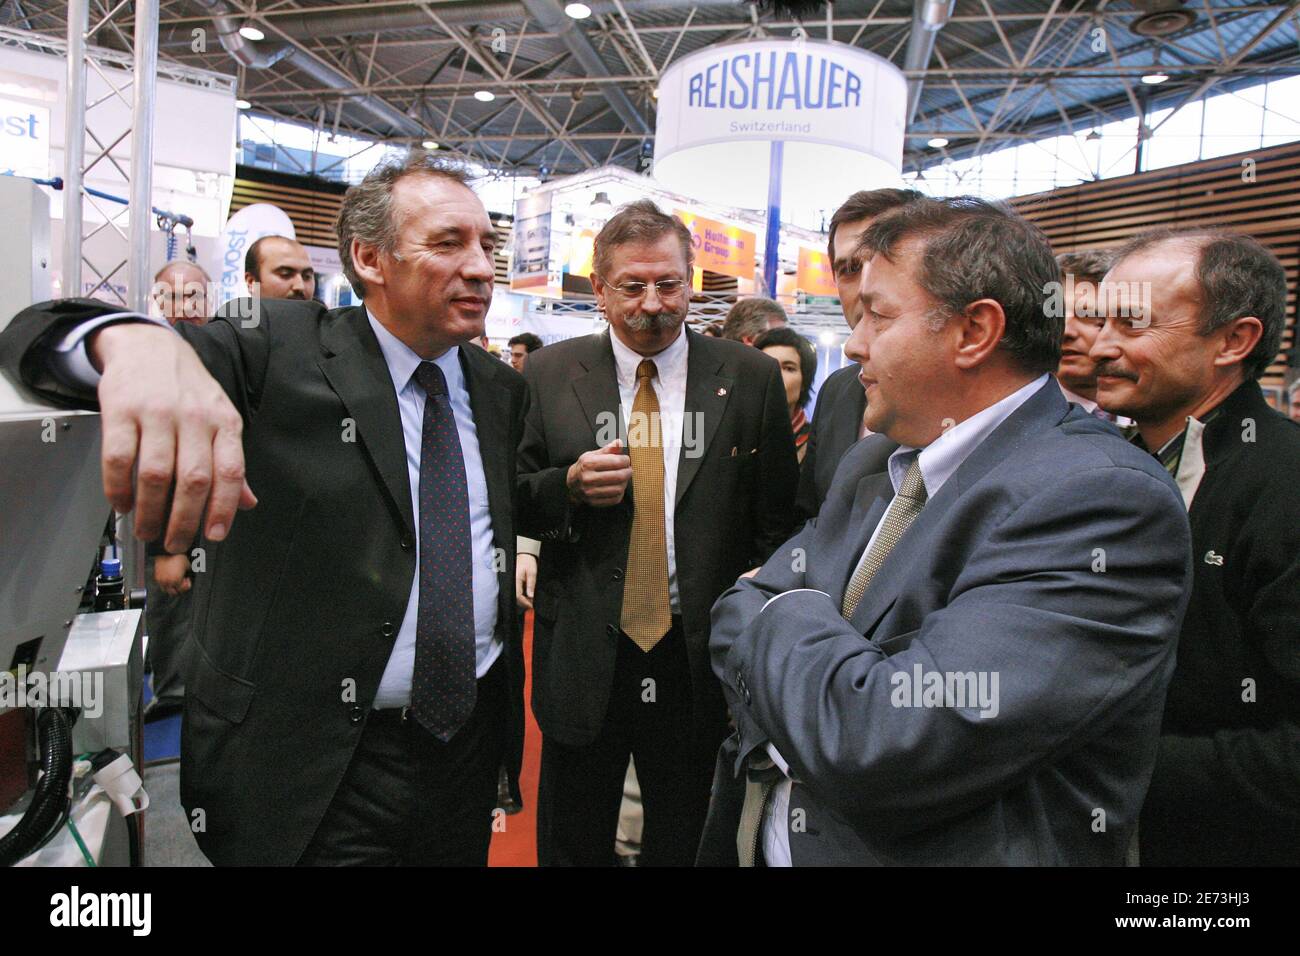 UDF Presidential candidate Francois Bayrou visits Industry fair in Lyon, France on March 7, 2007. Photo by Corentin Fohlen/ABACAPRESS.COM Stock Photo